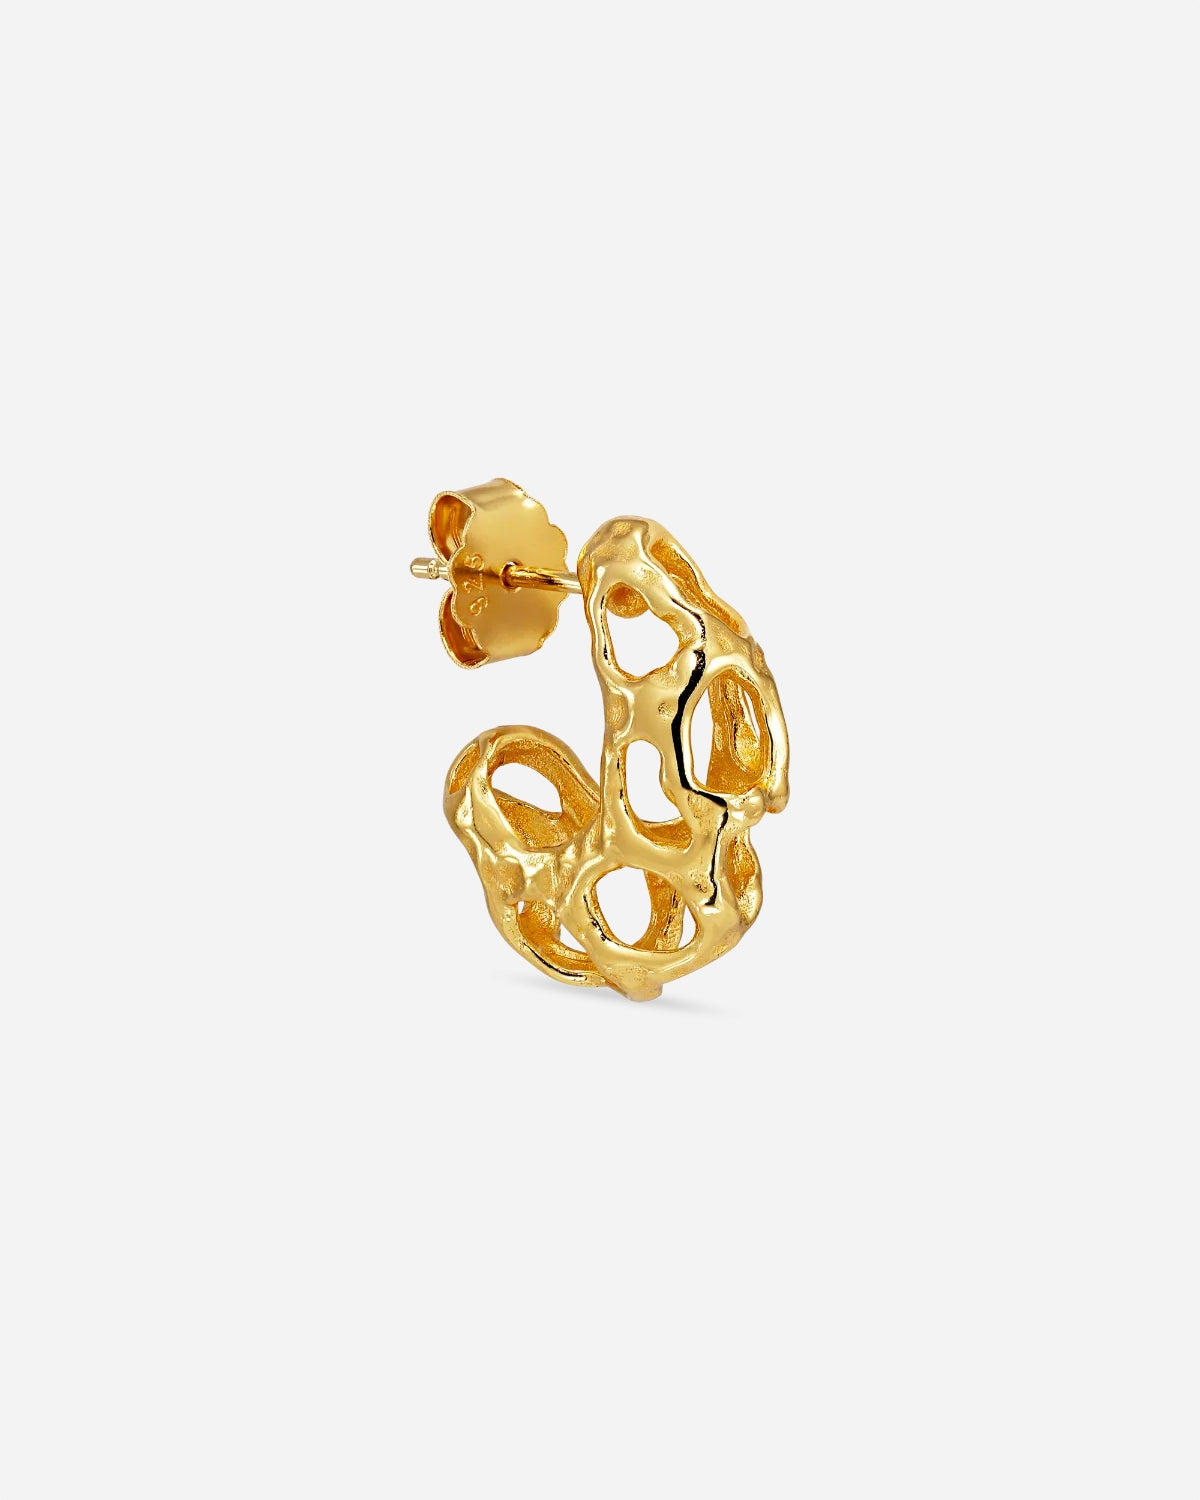 Small Chunky Space Earring - Gold